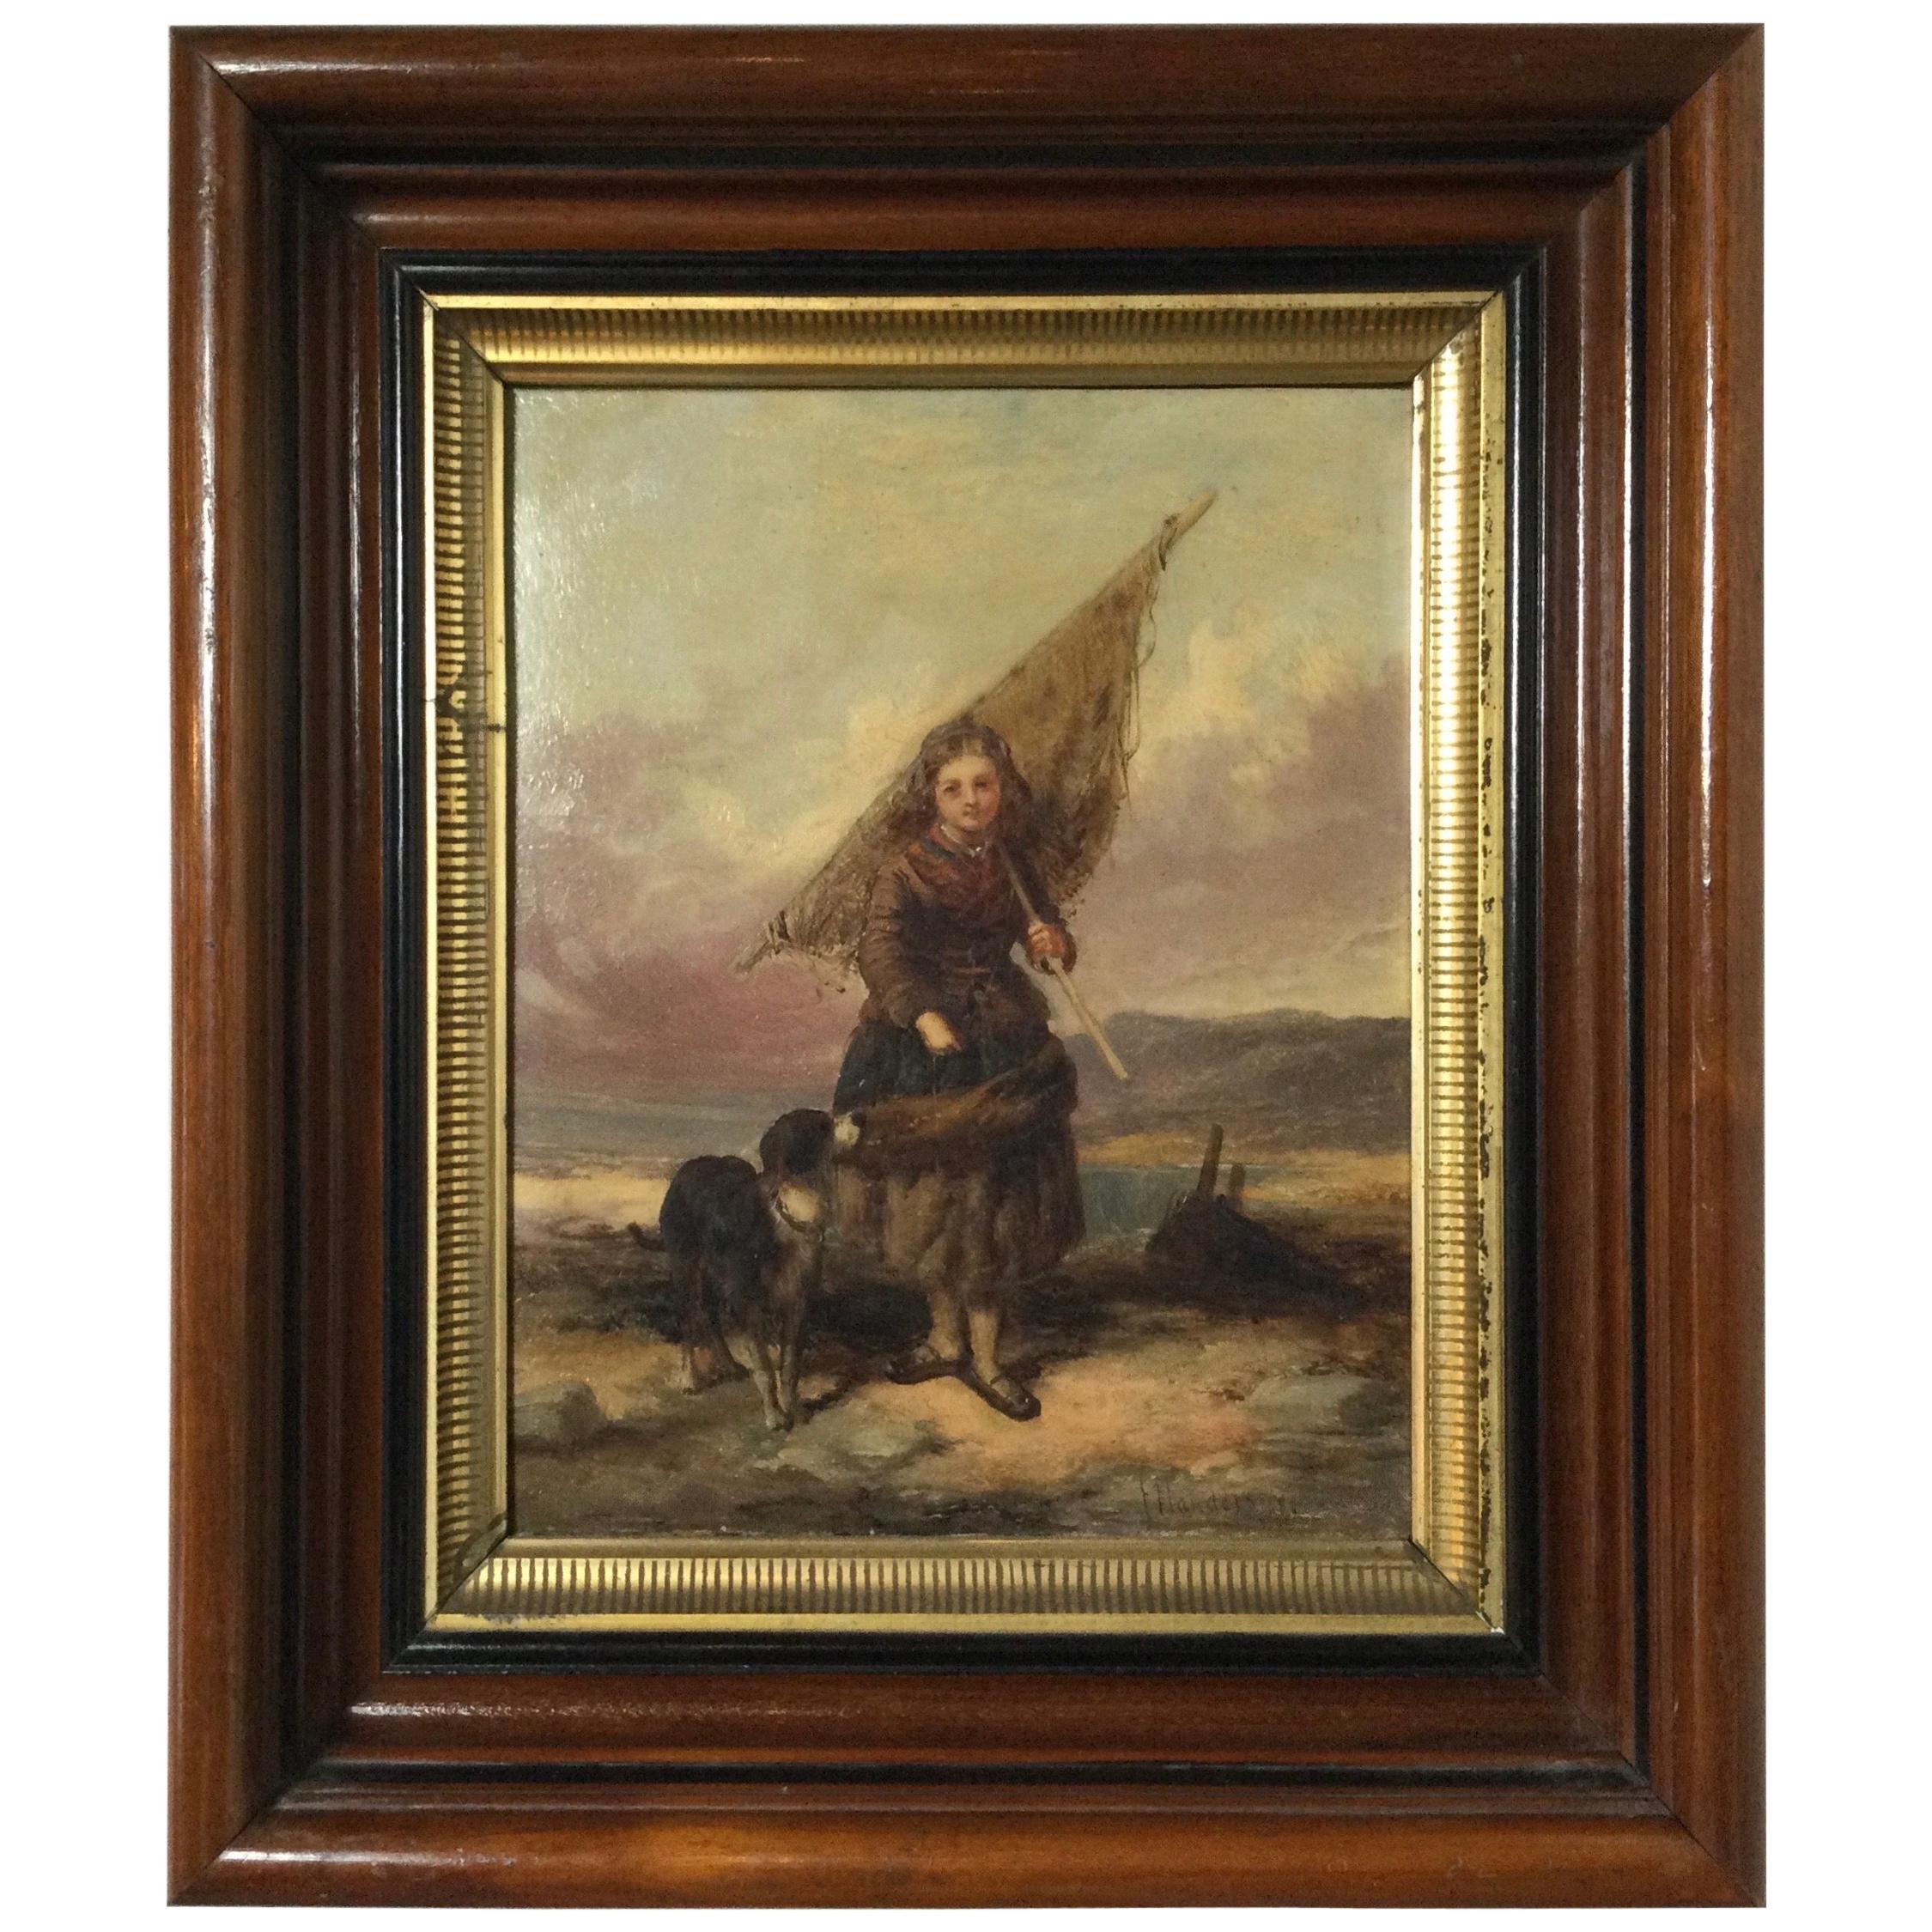 19th Century English Country Scene Oil Painting in Walnut Frame